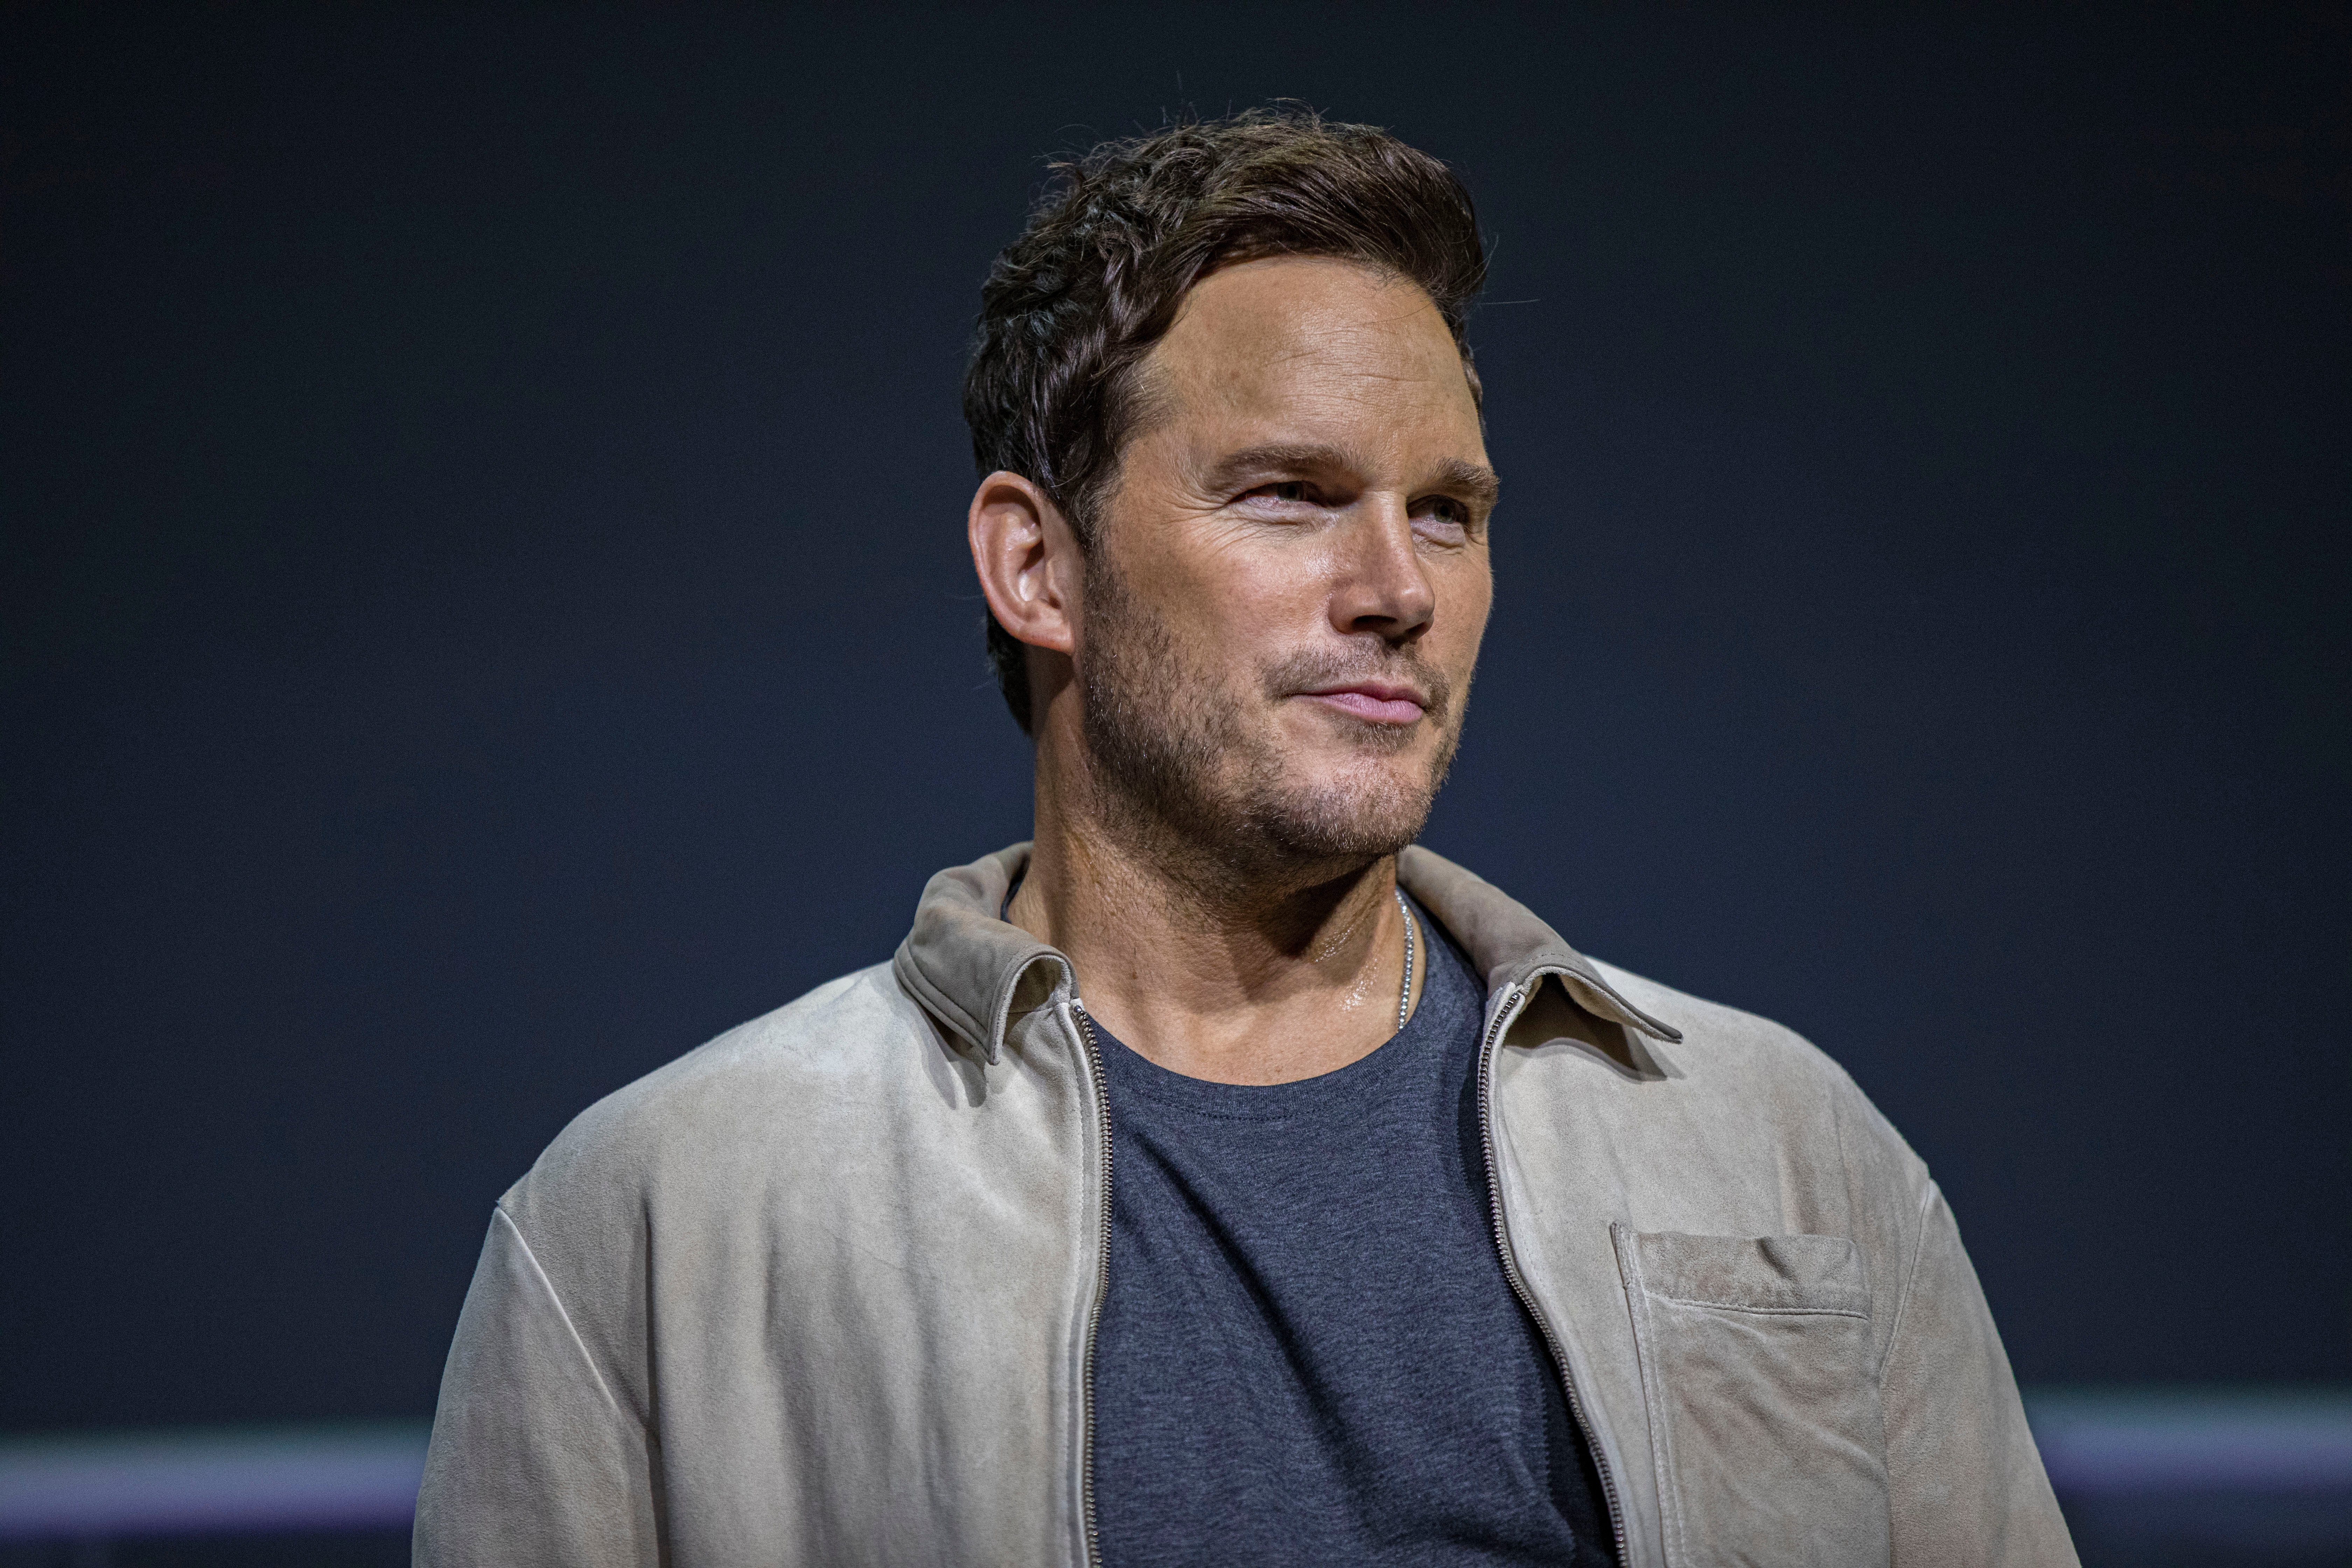 It'd be strange to continue without: Chris Pratt Confirms Return to MCU  as Peter Quill/Star-Lord if Marvel Asks Him to But Slyly Reveals His 1  Condition - FandomWire